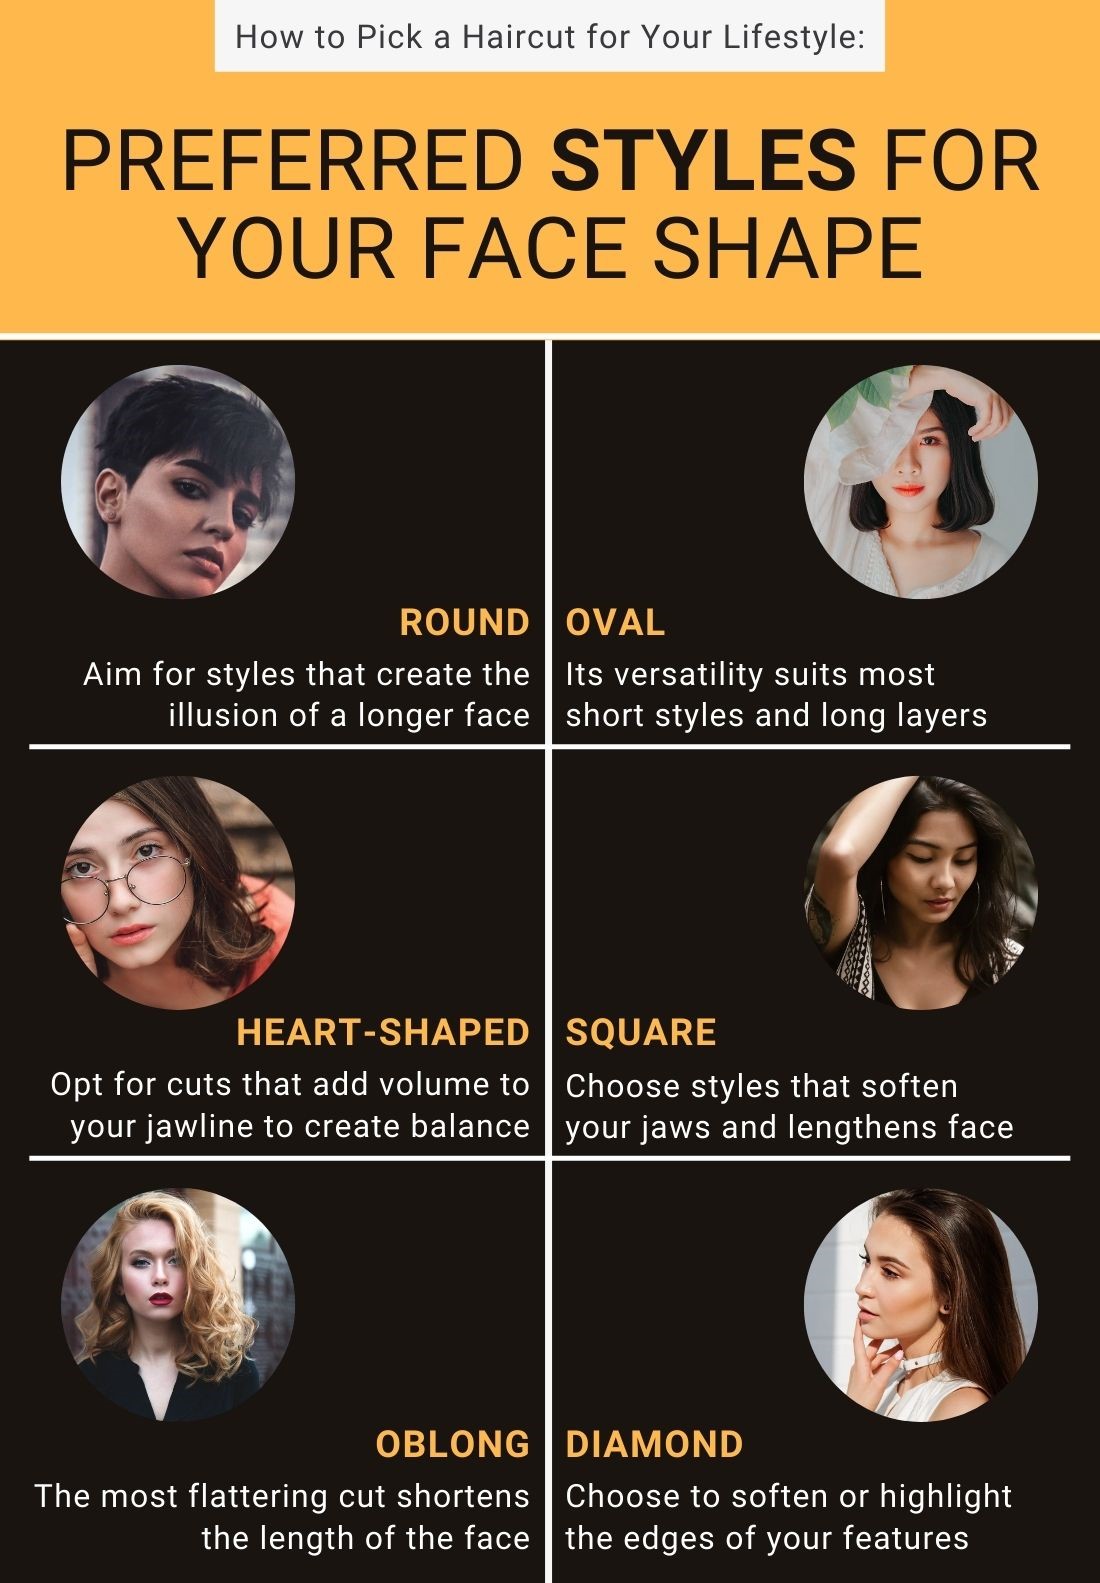 How to Pick A Haircut for Your Lifestyle | Yoon Salon